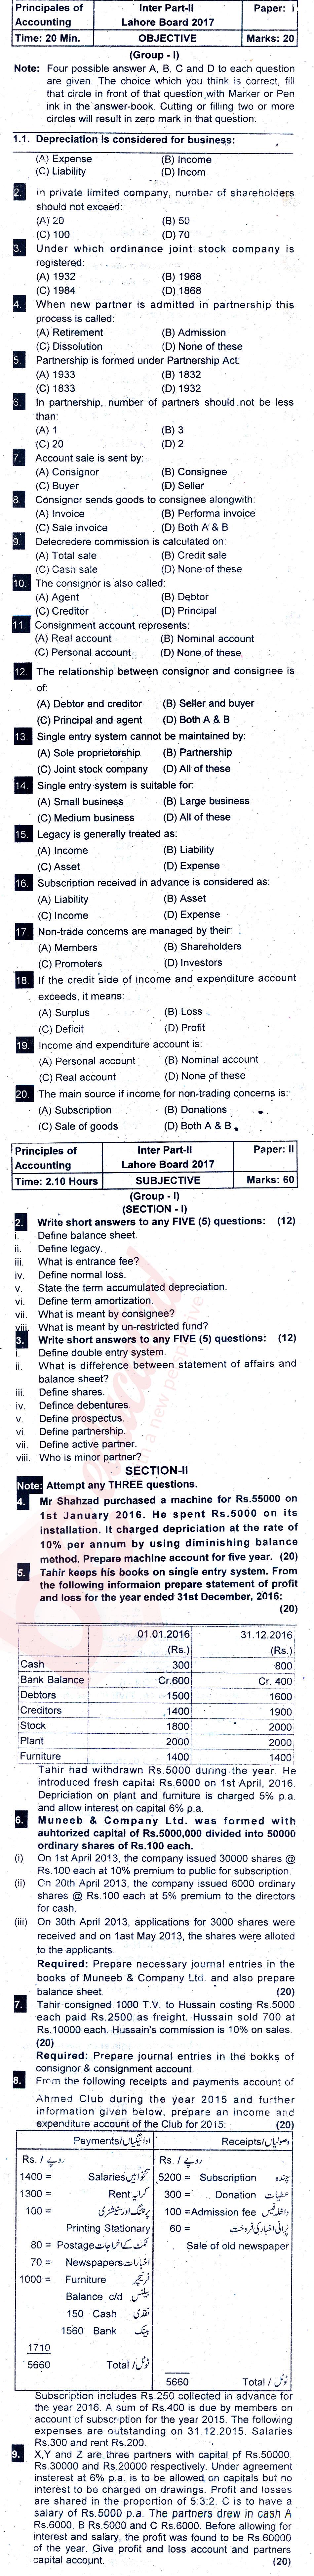 Principles of Accounting ICOM Part 2 Past Paper Group 1 BISE Lahore 2017